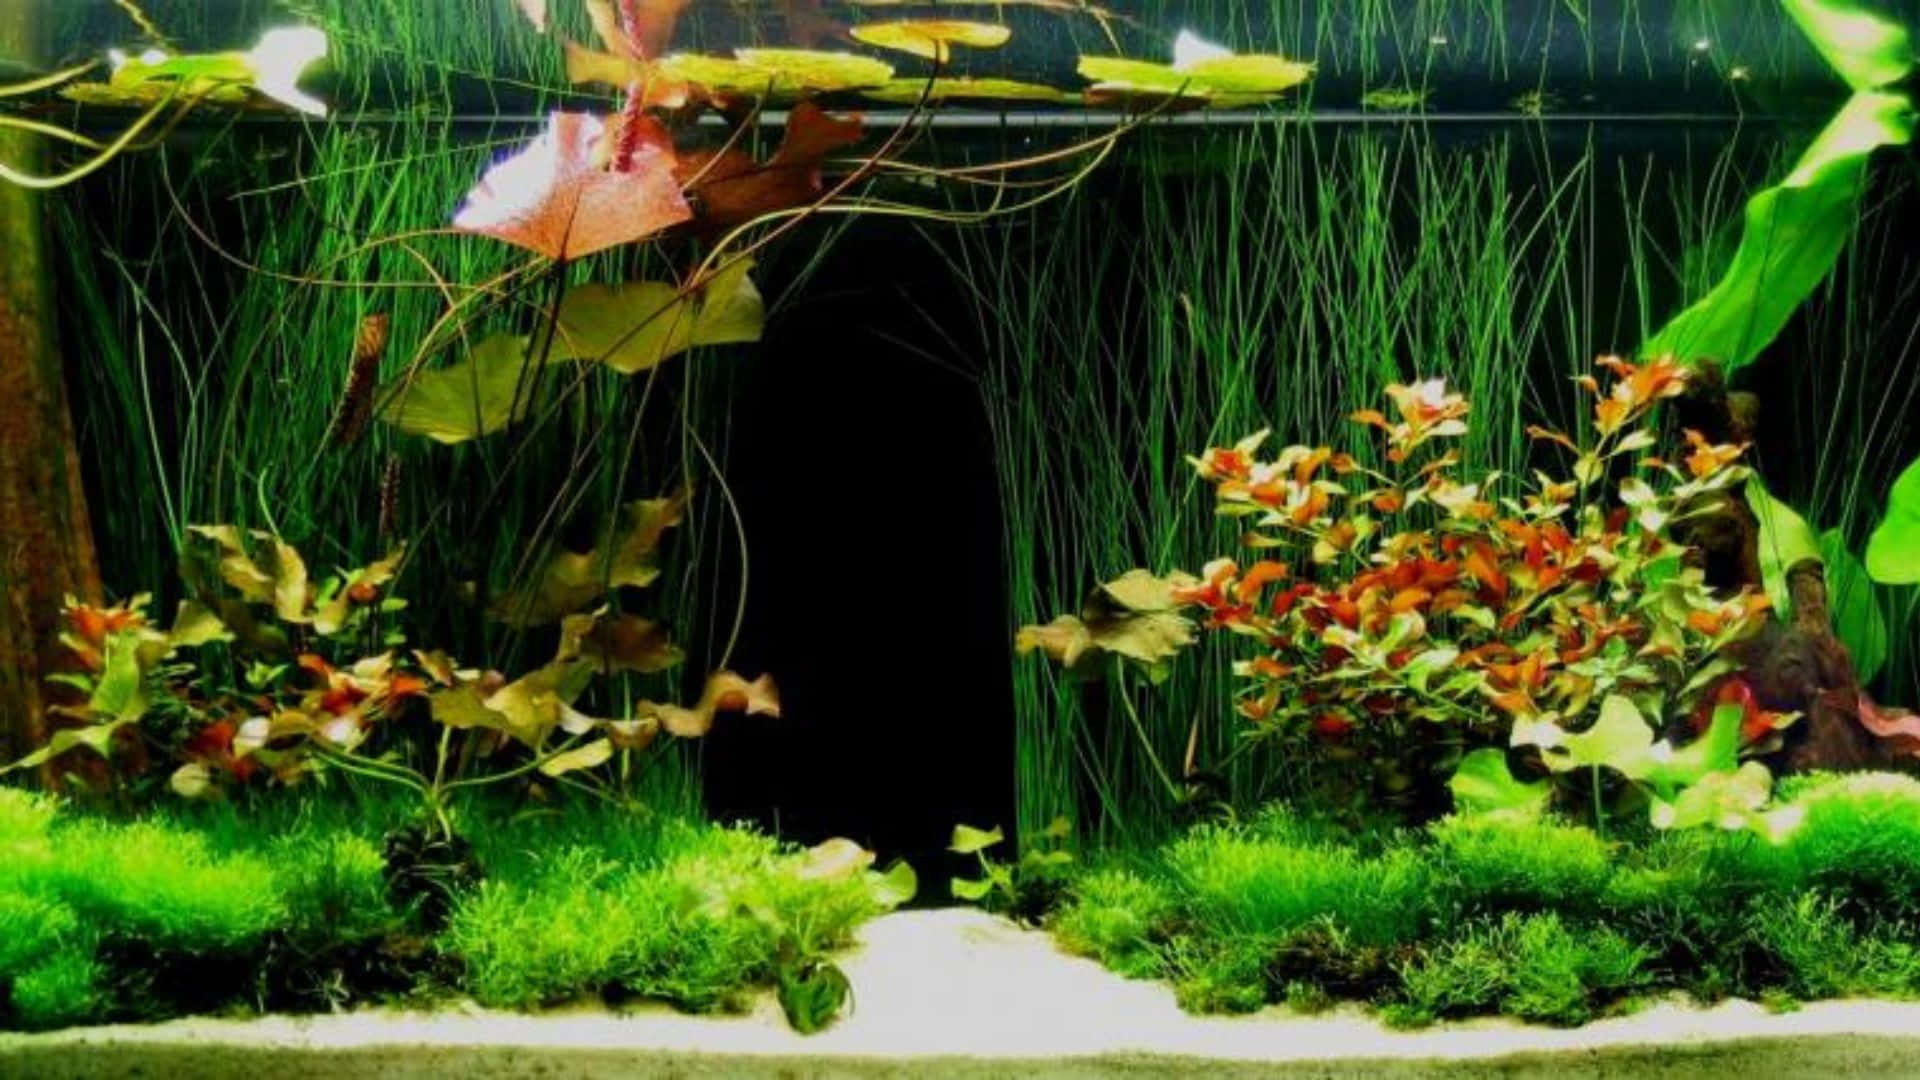 Enjoy the peaceful views of the vibrant 3D Fish Tank